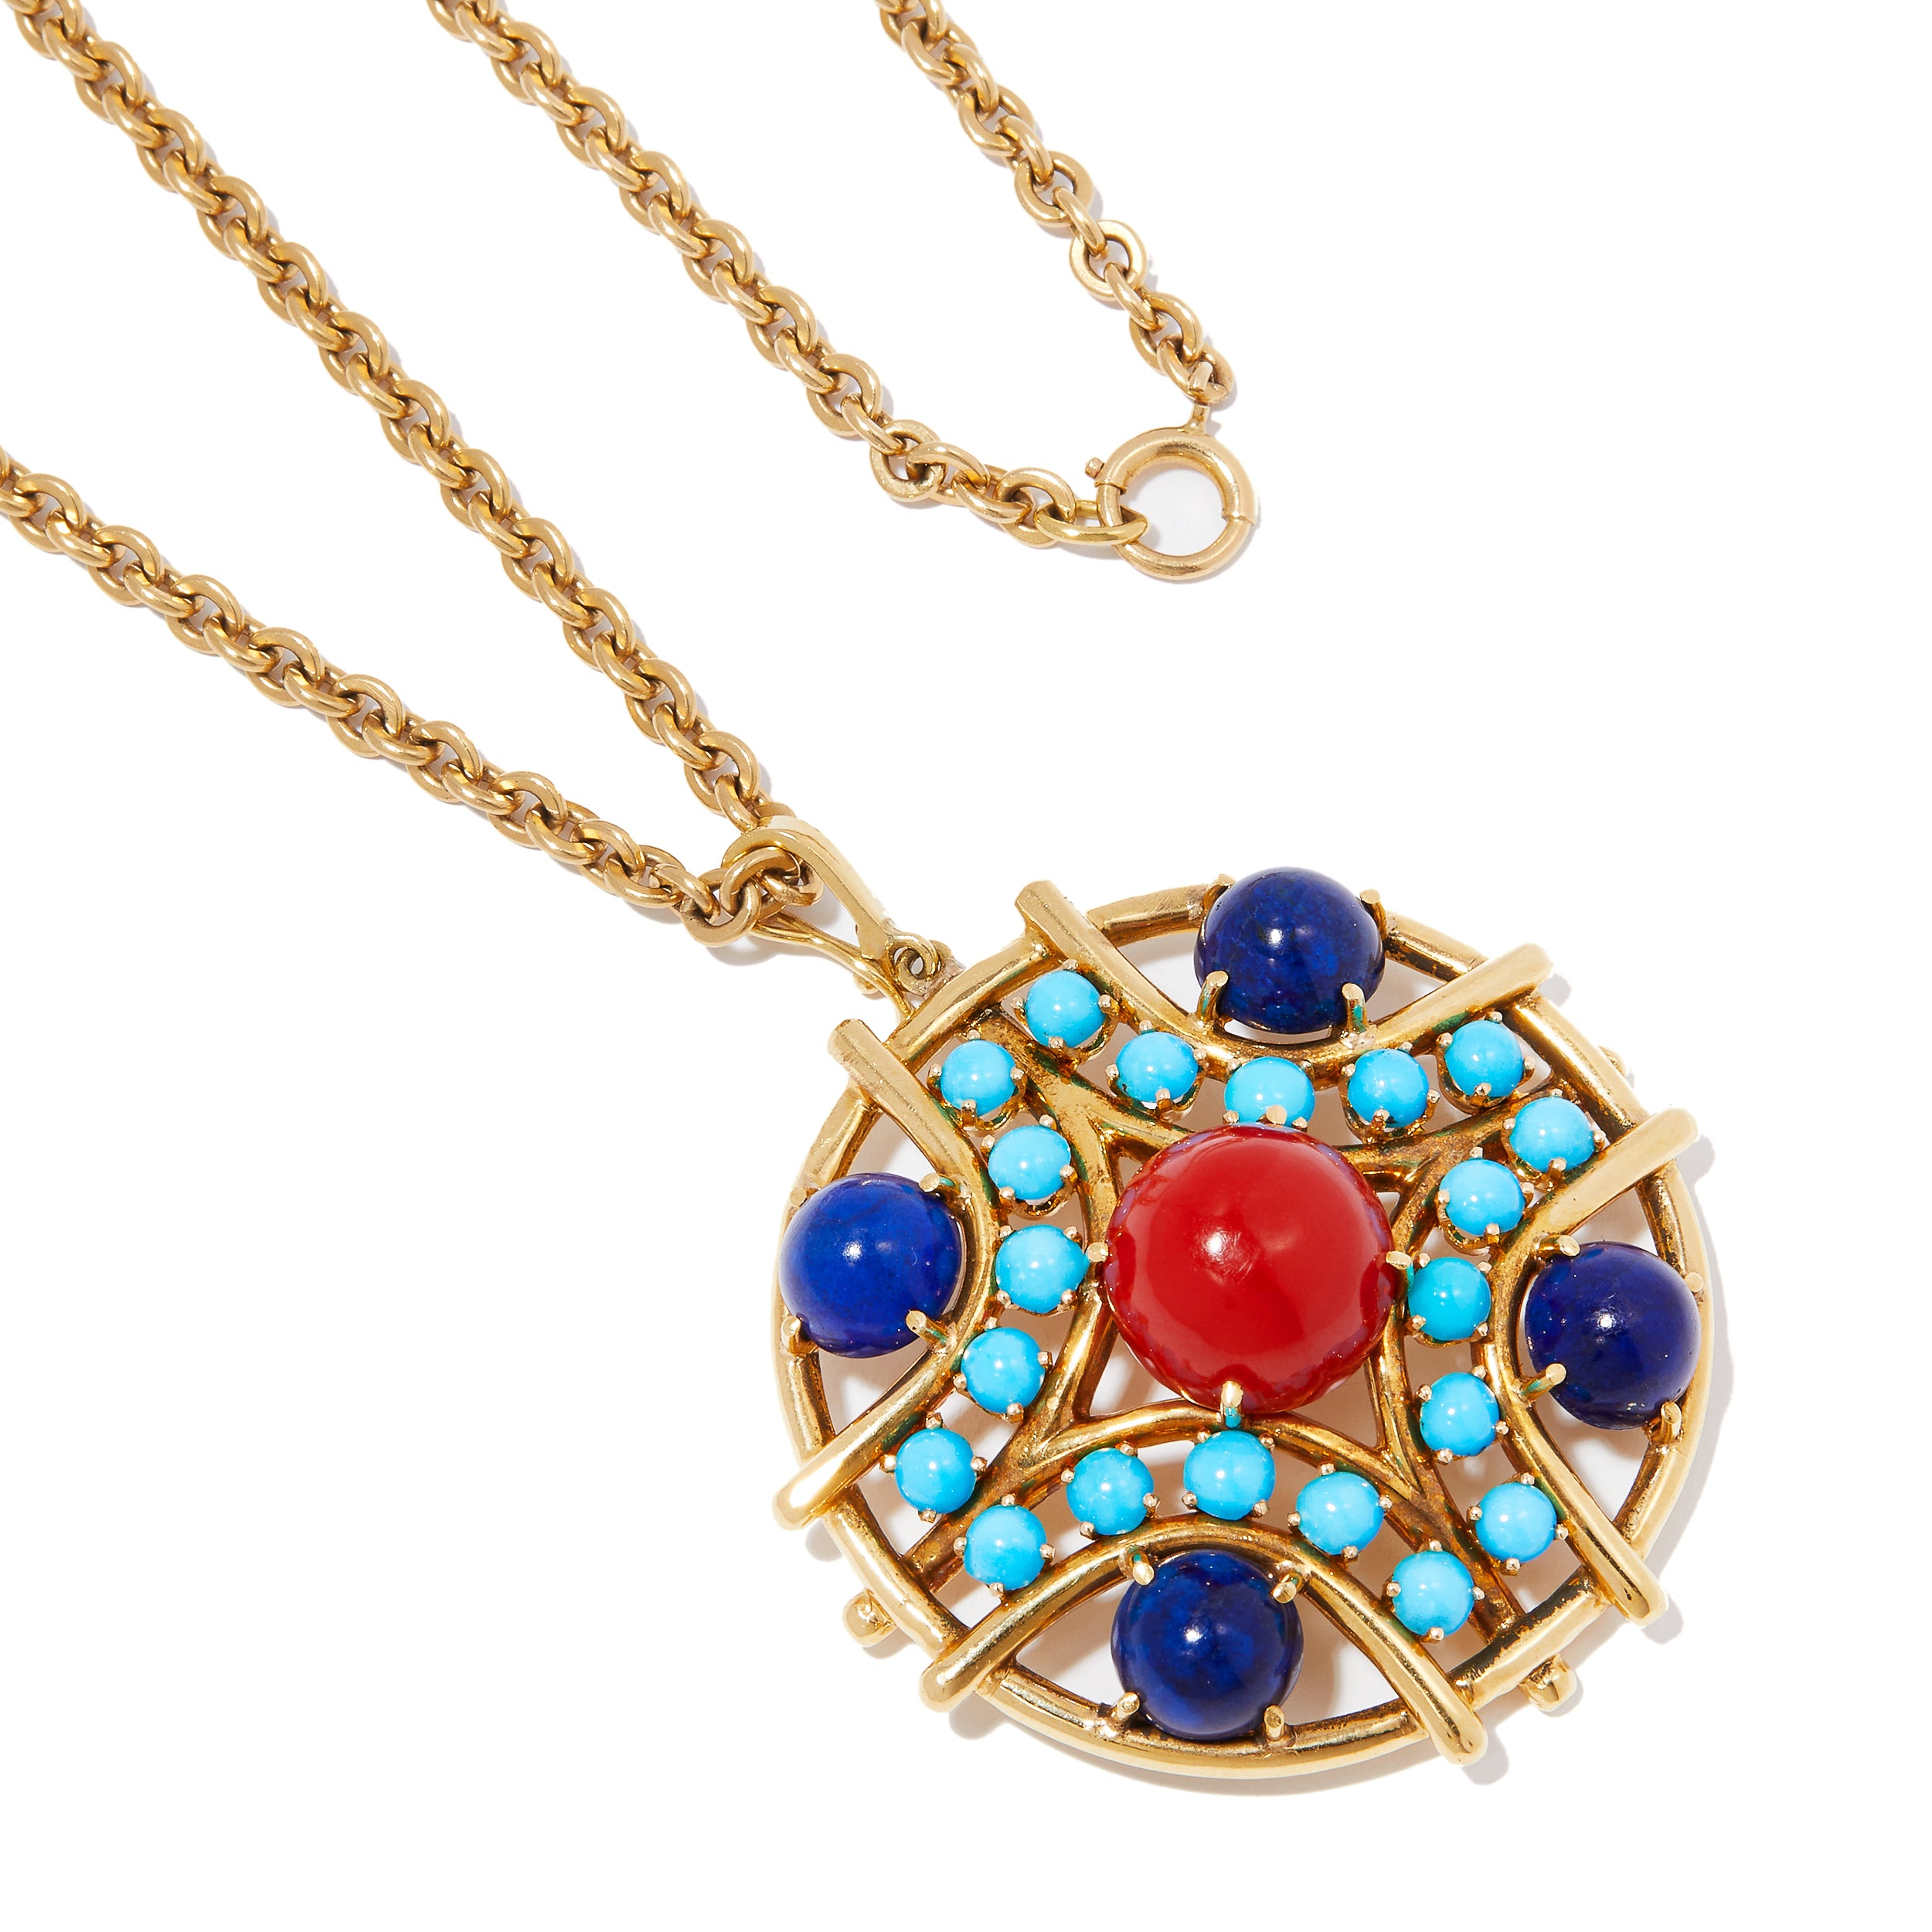 YazJewels Contemporary Gold Medallion Necklace with Multi-Coloured Gemstones by Saks Fifth Avenue